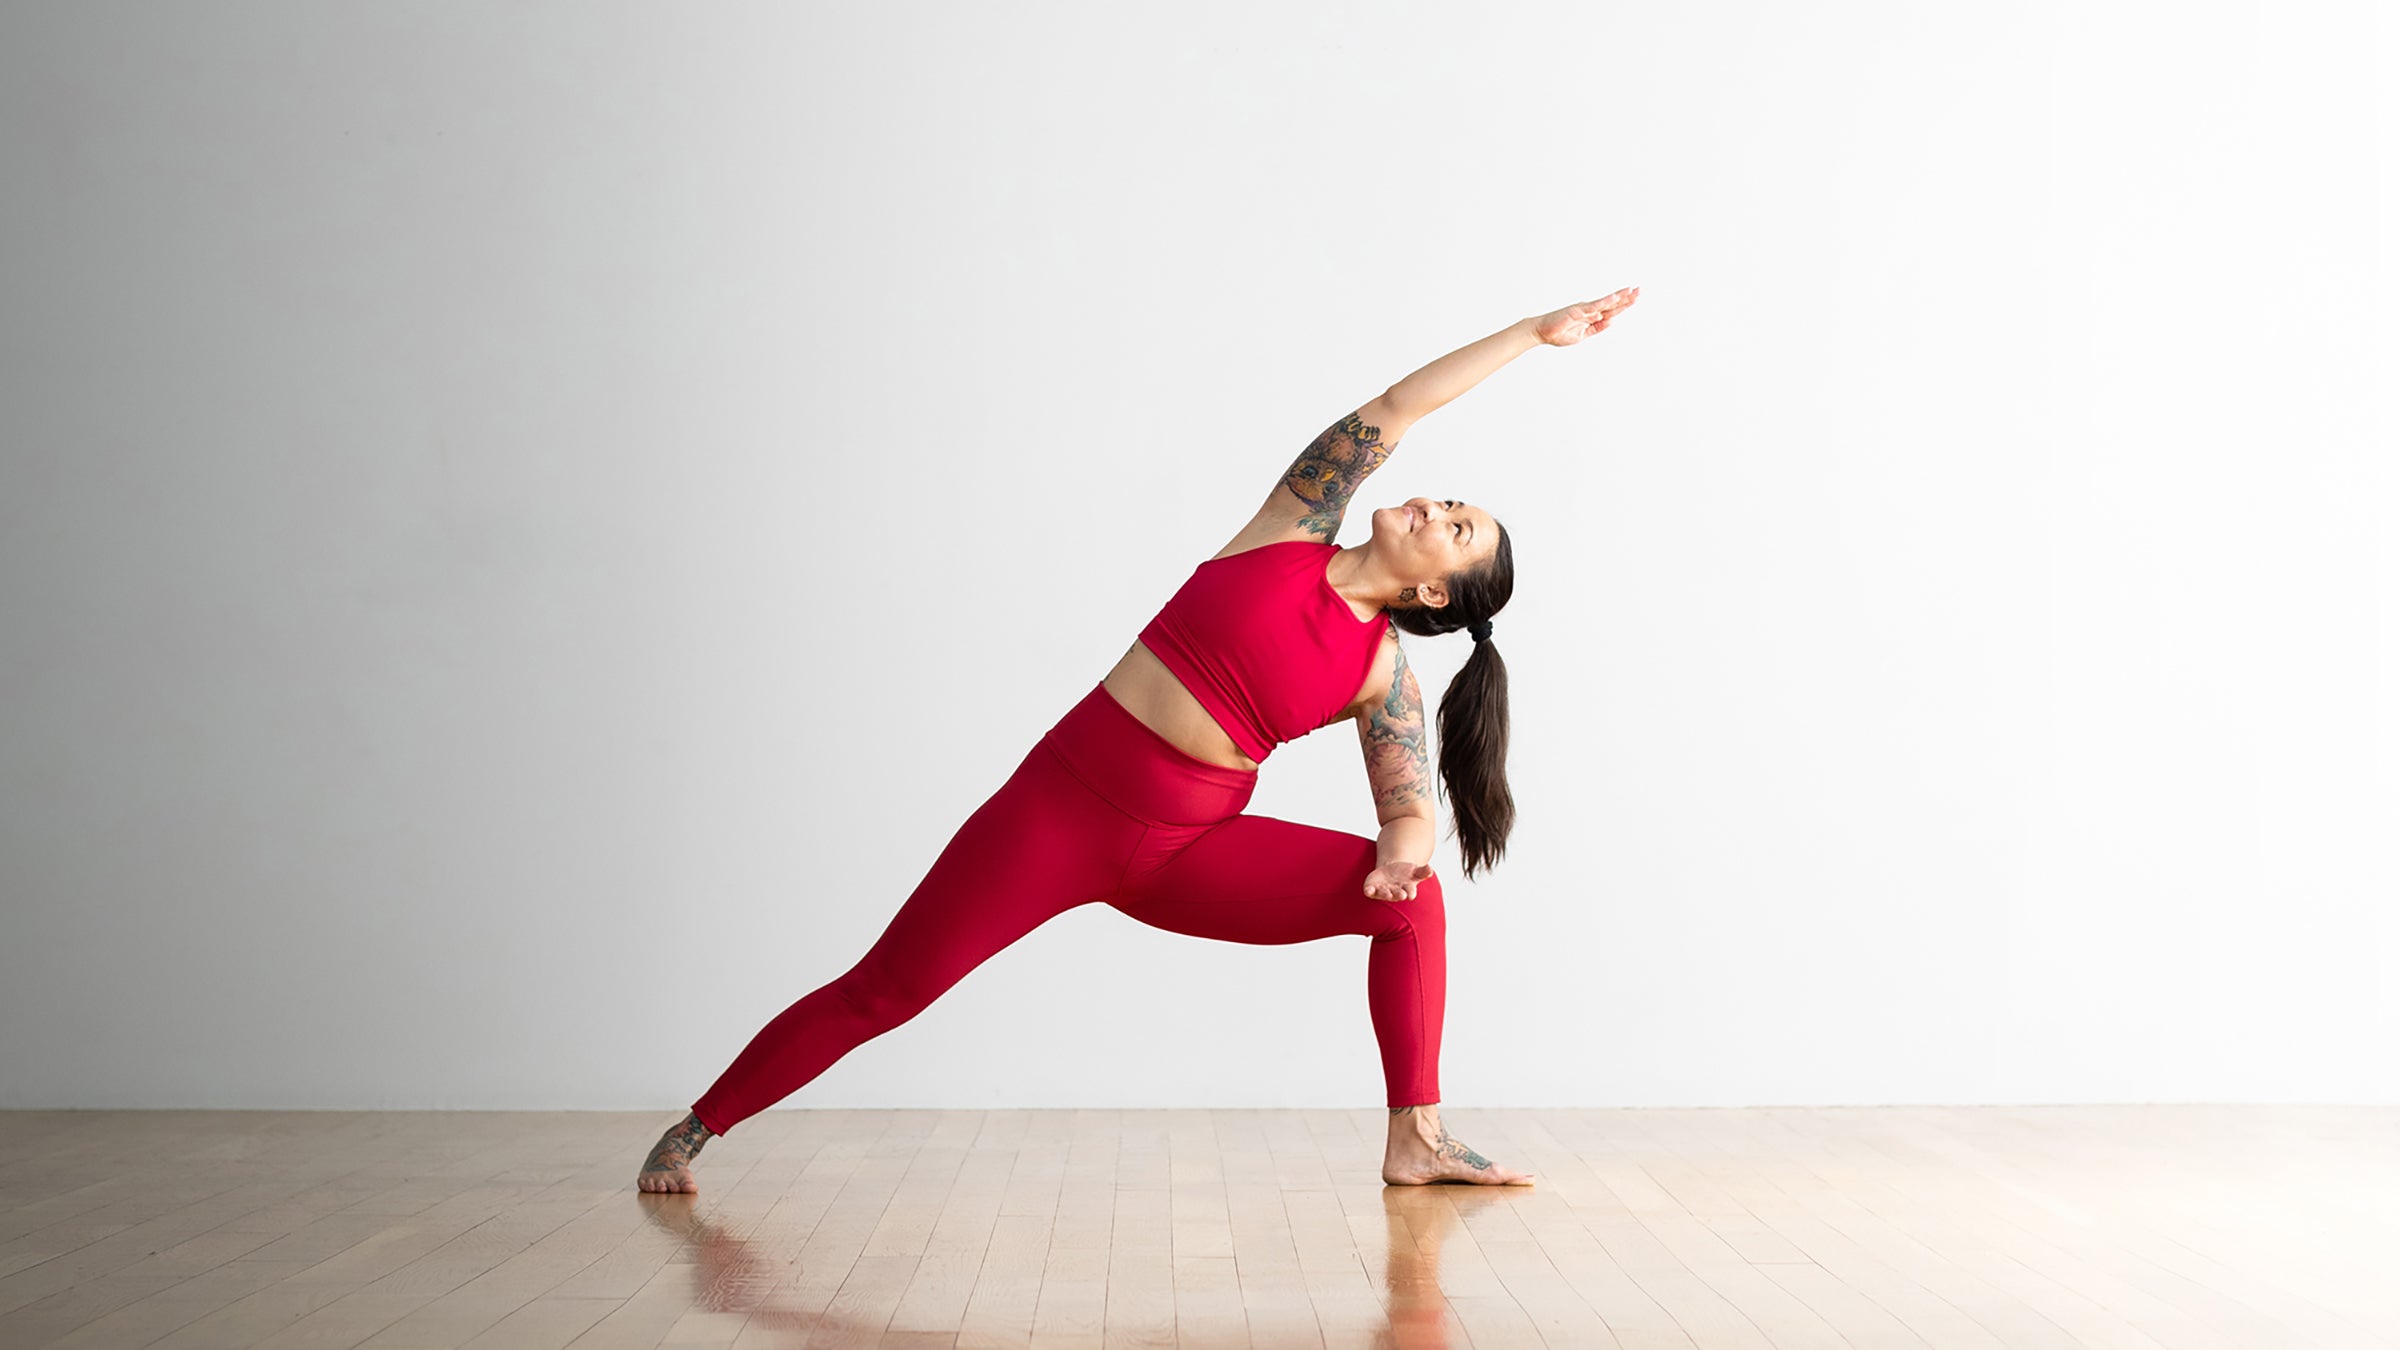 Chair Yoga: 11 Poses to Find Your Flow